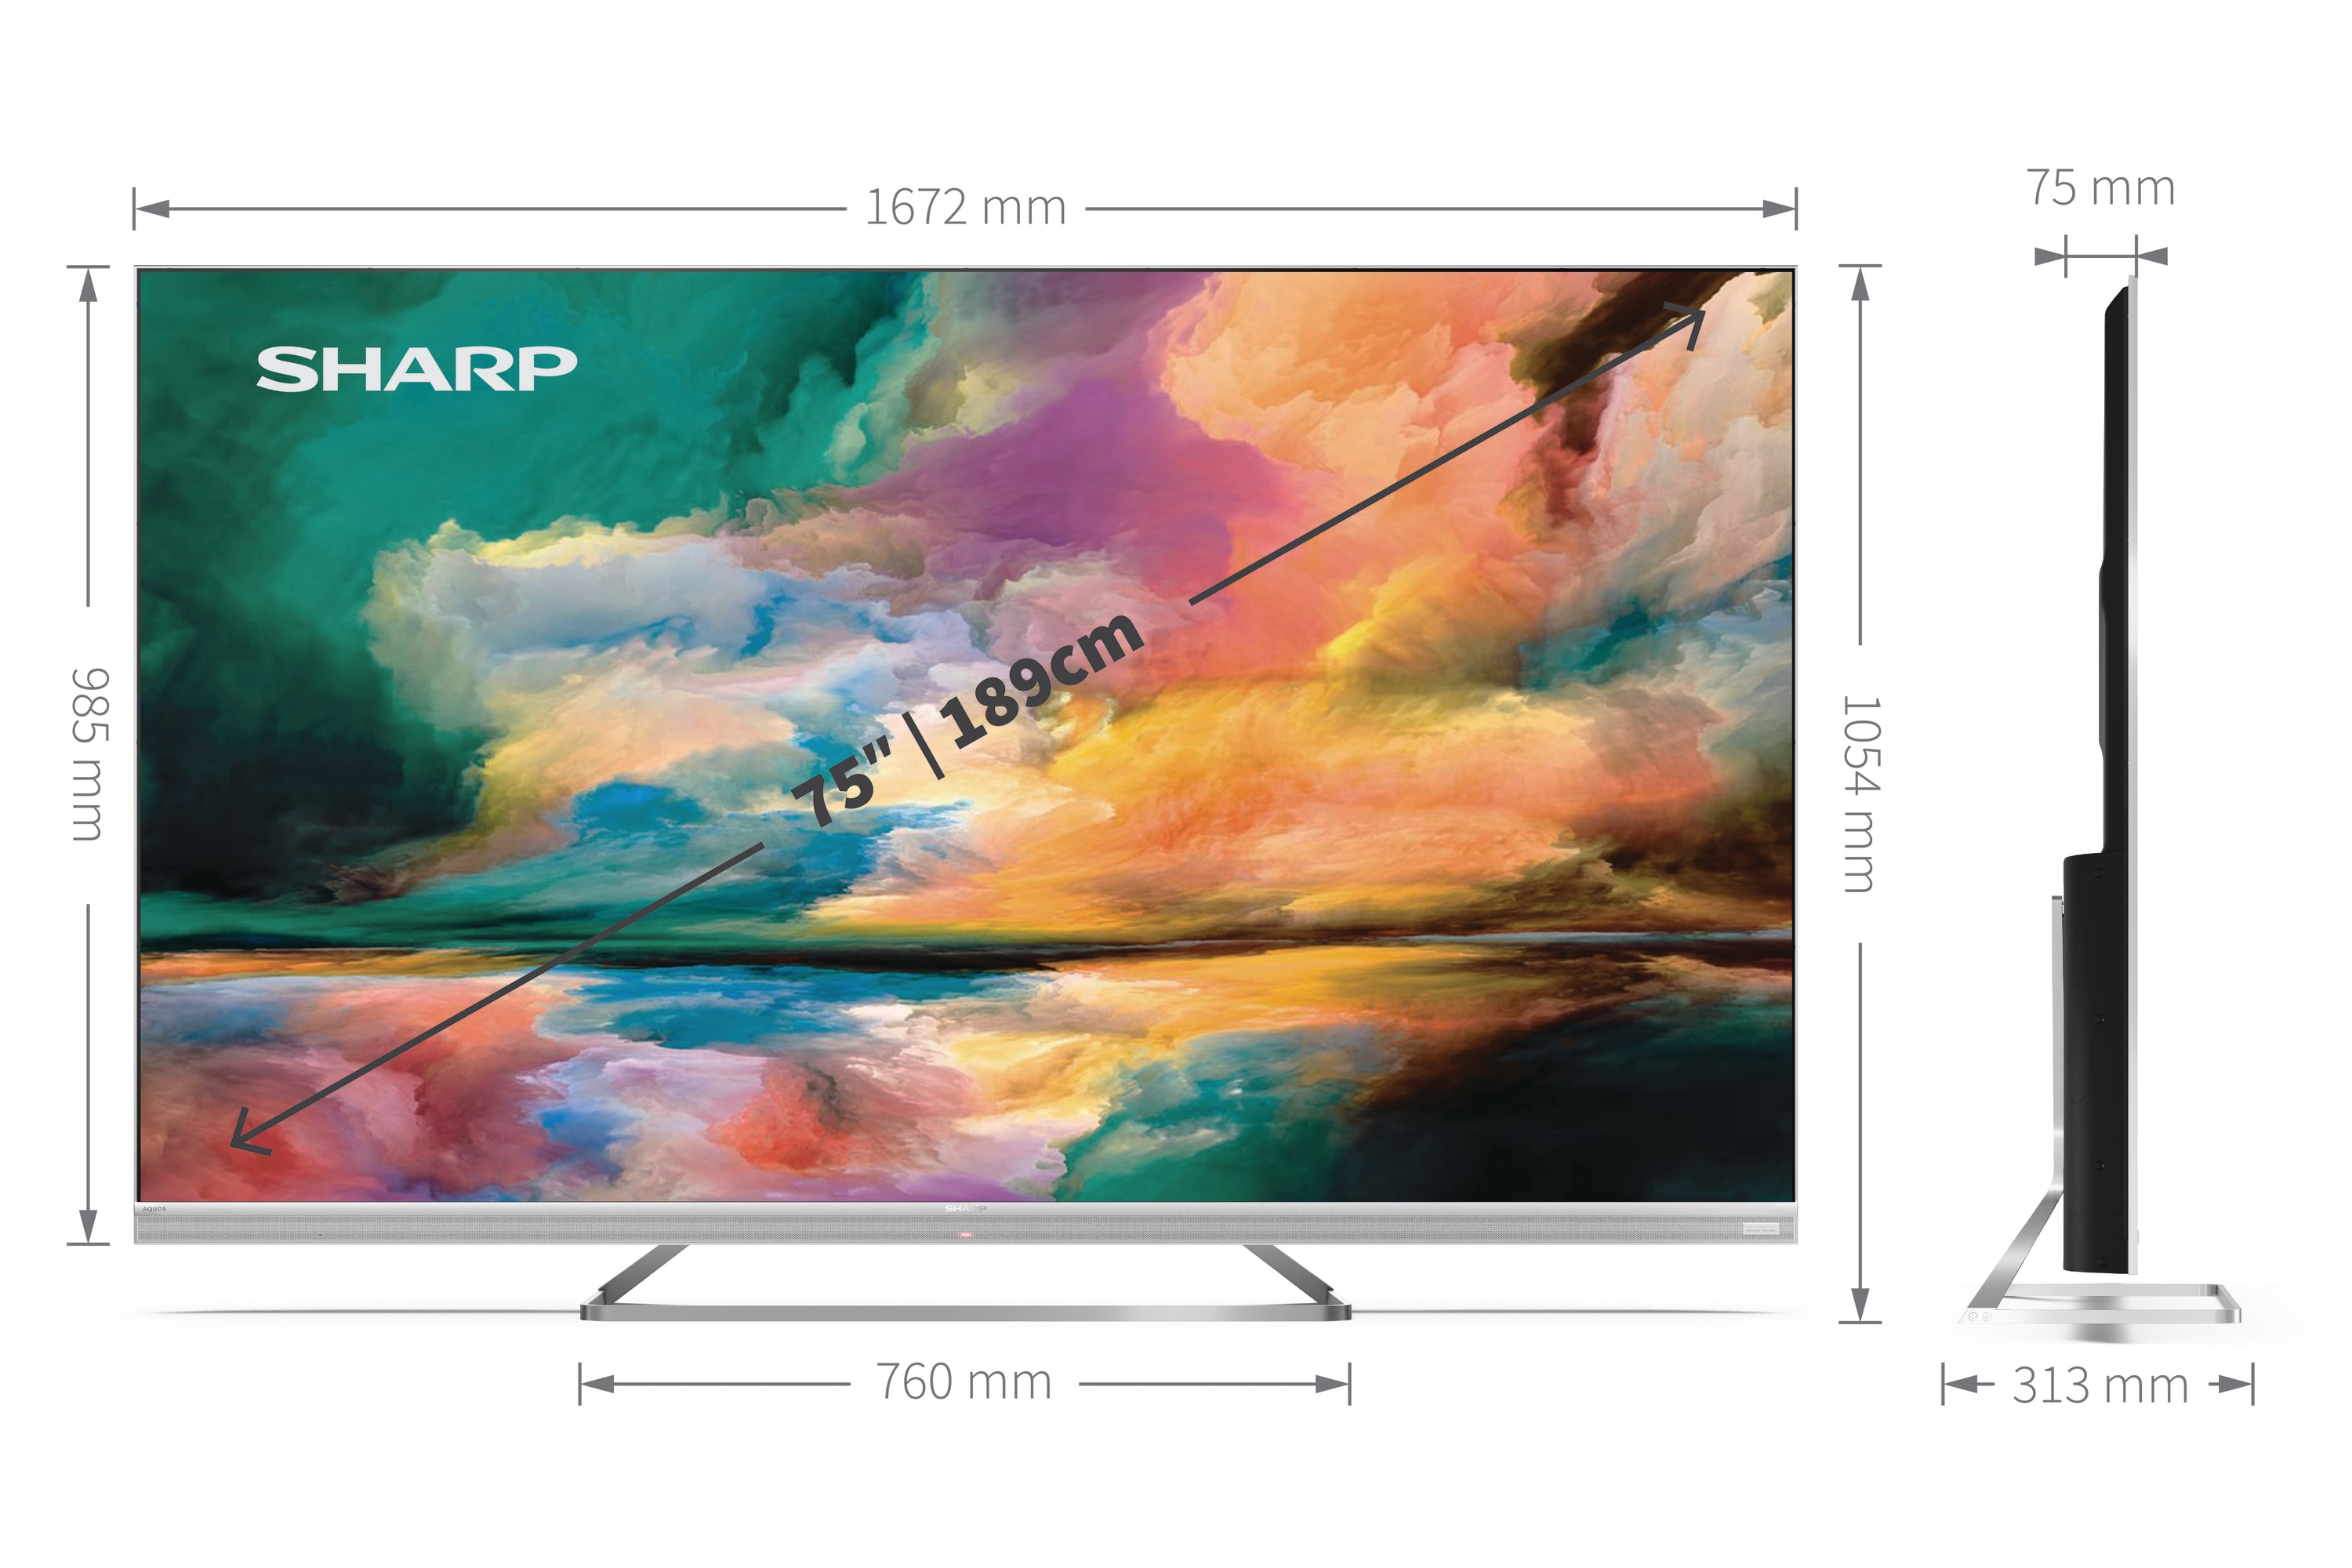 Android TV 4K UHD - 75" 4K ULTRA HD QUANTUM DOT SHARP ANDROID TV™